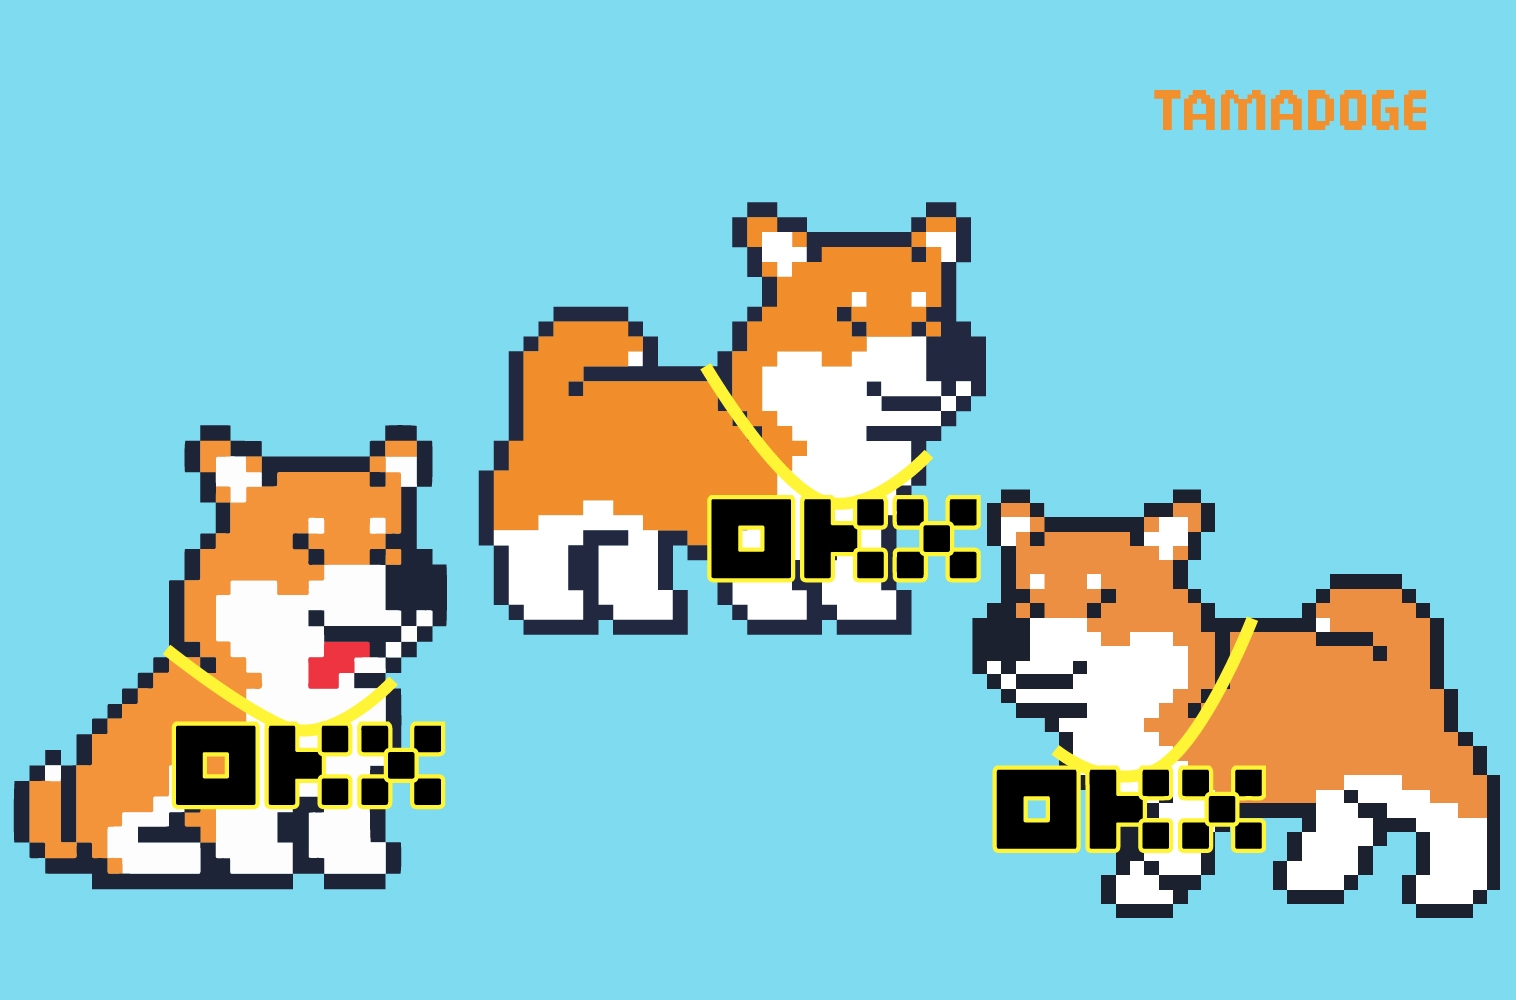 Best New Crypto Listing - Is Tamadoge the Next Shiba Inu, Dogecoin or GMT